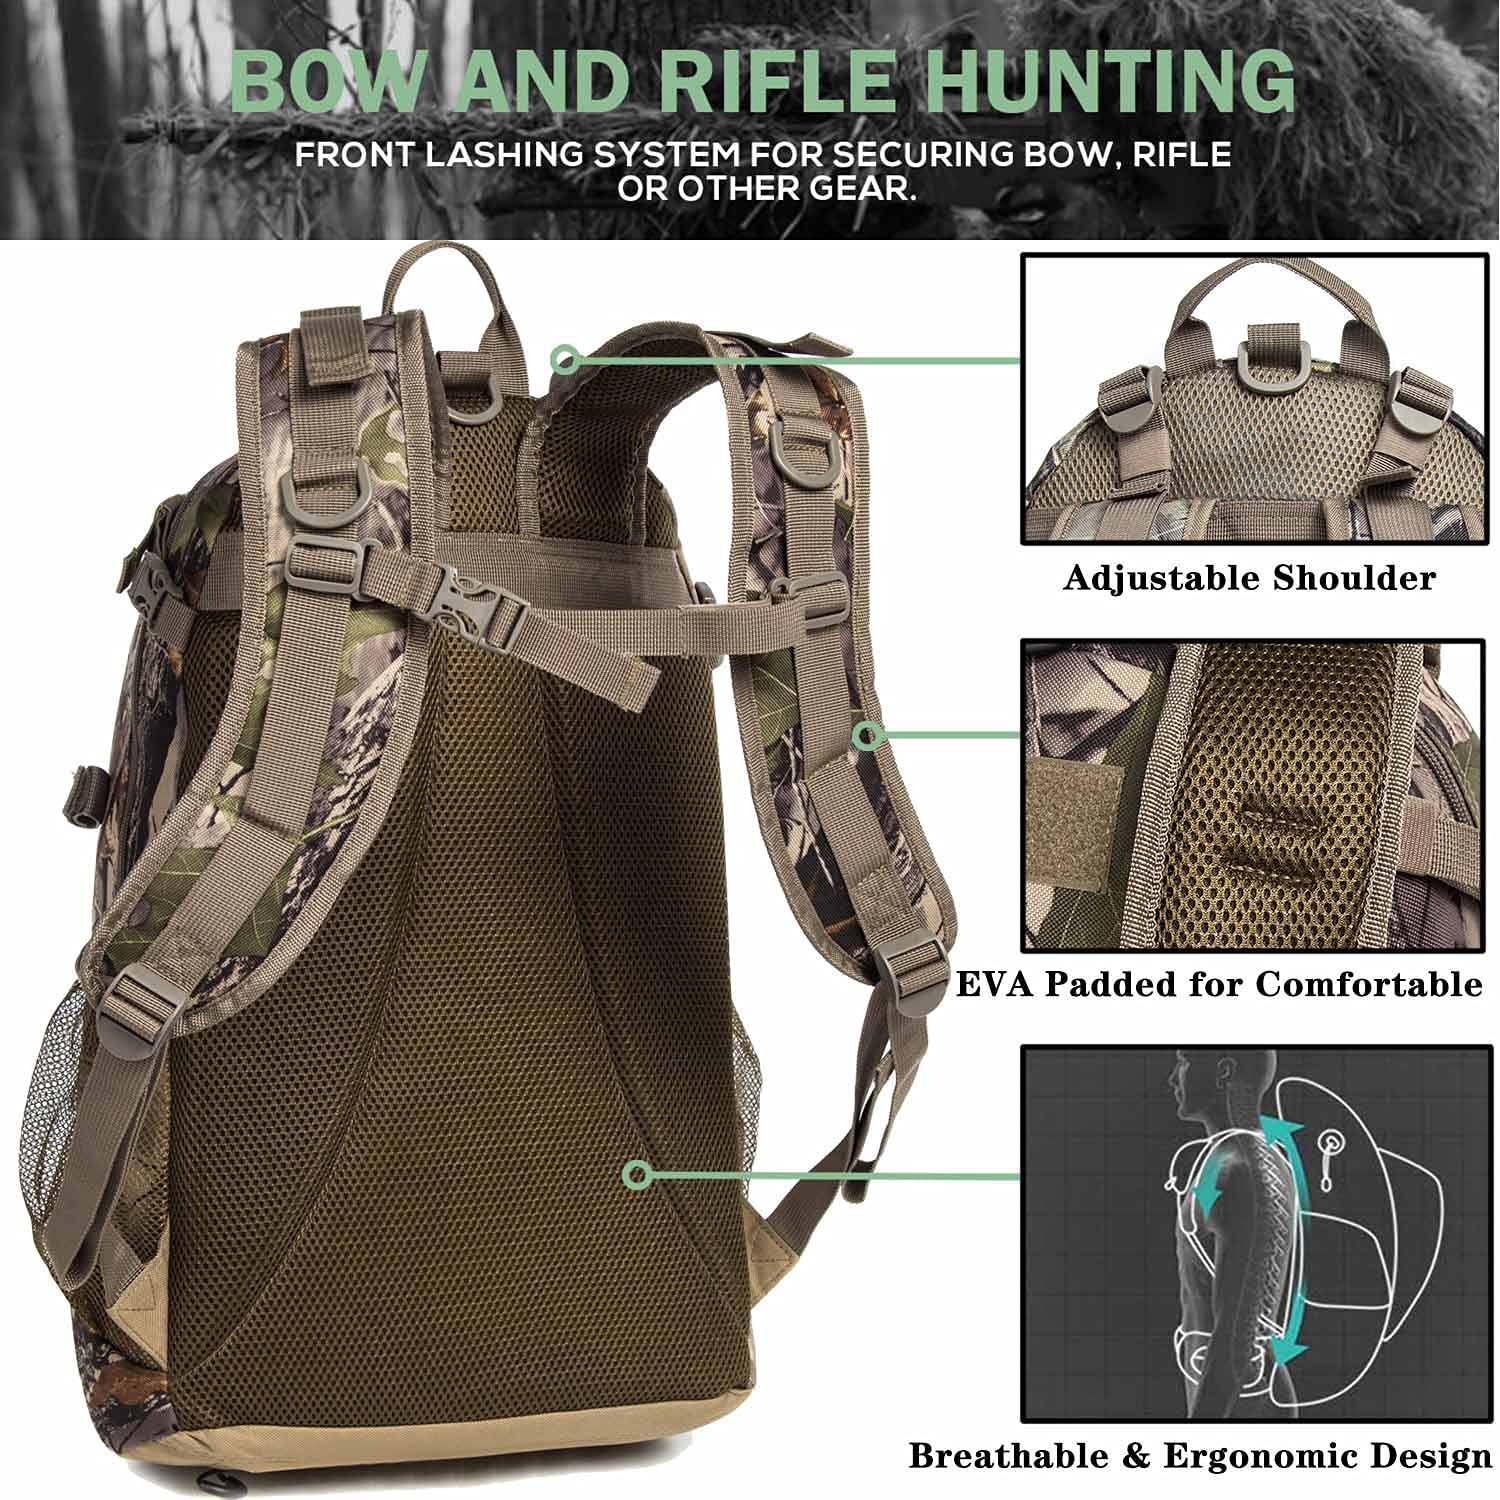 MARITTON Hunting Backpack,Durable Hunting Pack with Bow and Rifle Carry System for Camping,Hunting,Hiking. (Camo-Green)